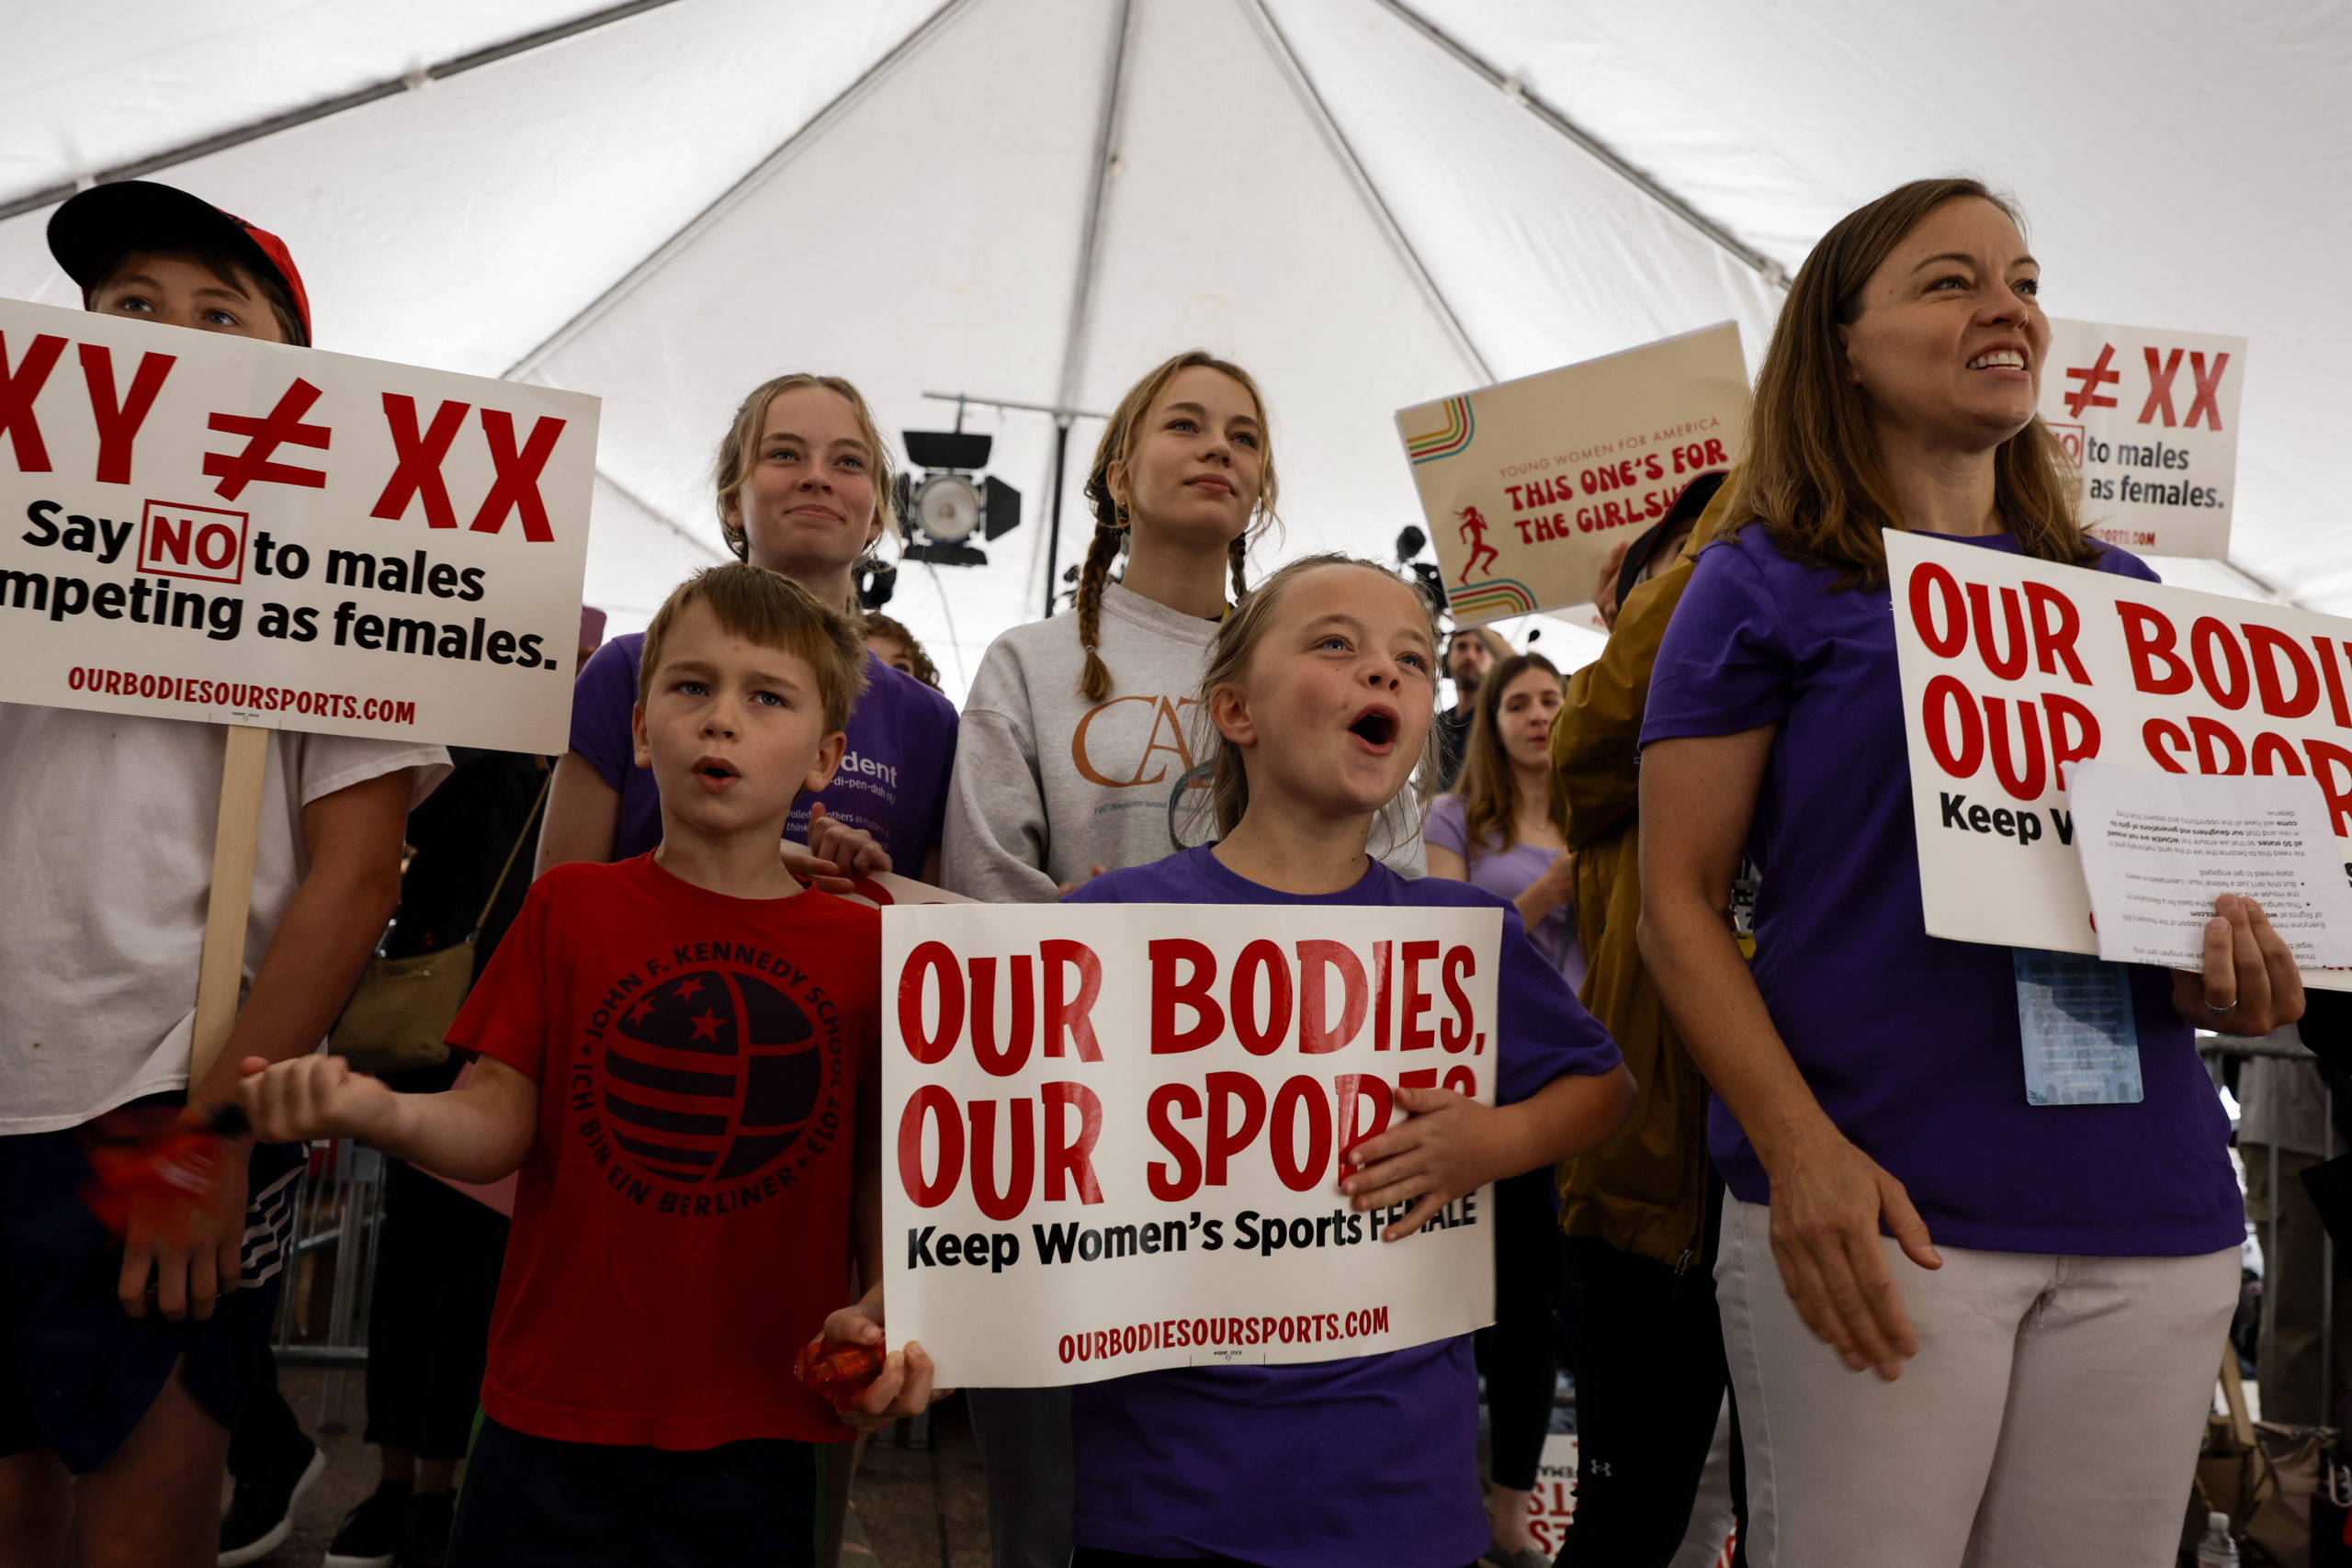 Demonstrators cheer during the speaking program at the "Our Bodies, Our Sports" rally for the 50th anniversary of Title IX at Freedom Plaza on June 23, 2022 in Washington, DC. The rally, organized by multiple athletic women's groups was held to call on U.S. President Joe Biden to put restrictions on transgender females and "advocate to keep women's sports female."(Photo by Anna Moneymaker/Getty Images)